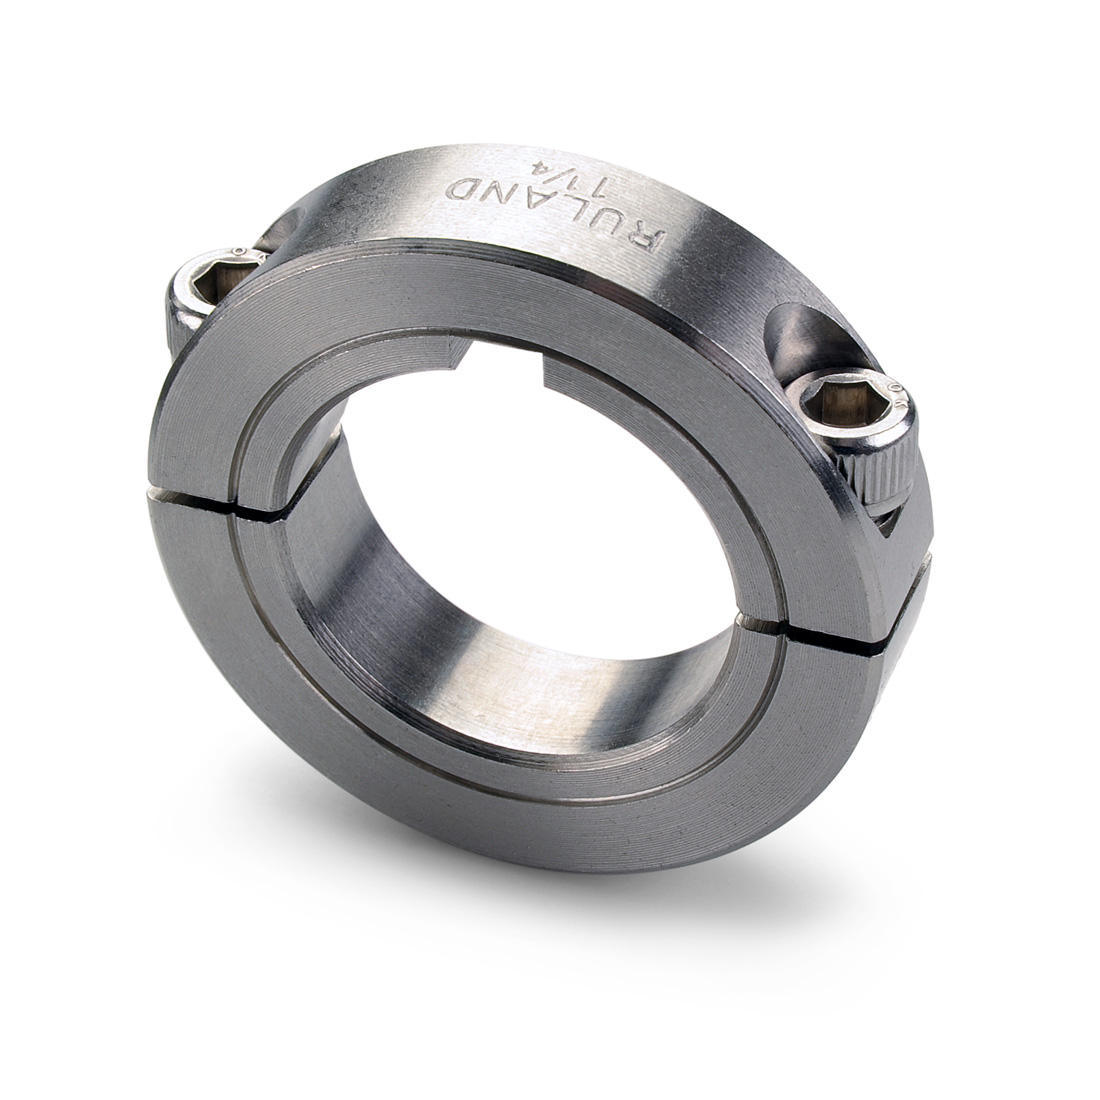 Ruland MSP-30-SS Two-Piece Clamping Shaft Collar Stainless Steel 54mm OD Metric 30mm Bore 15mm Width 